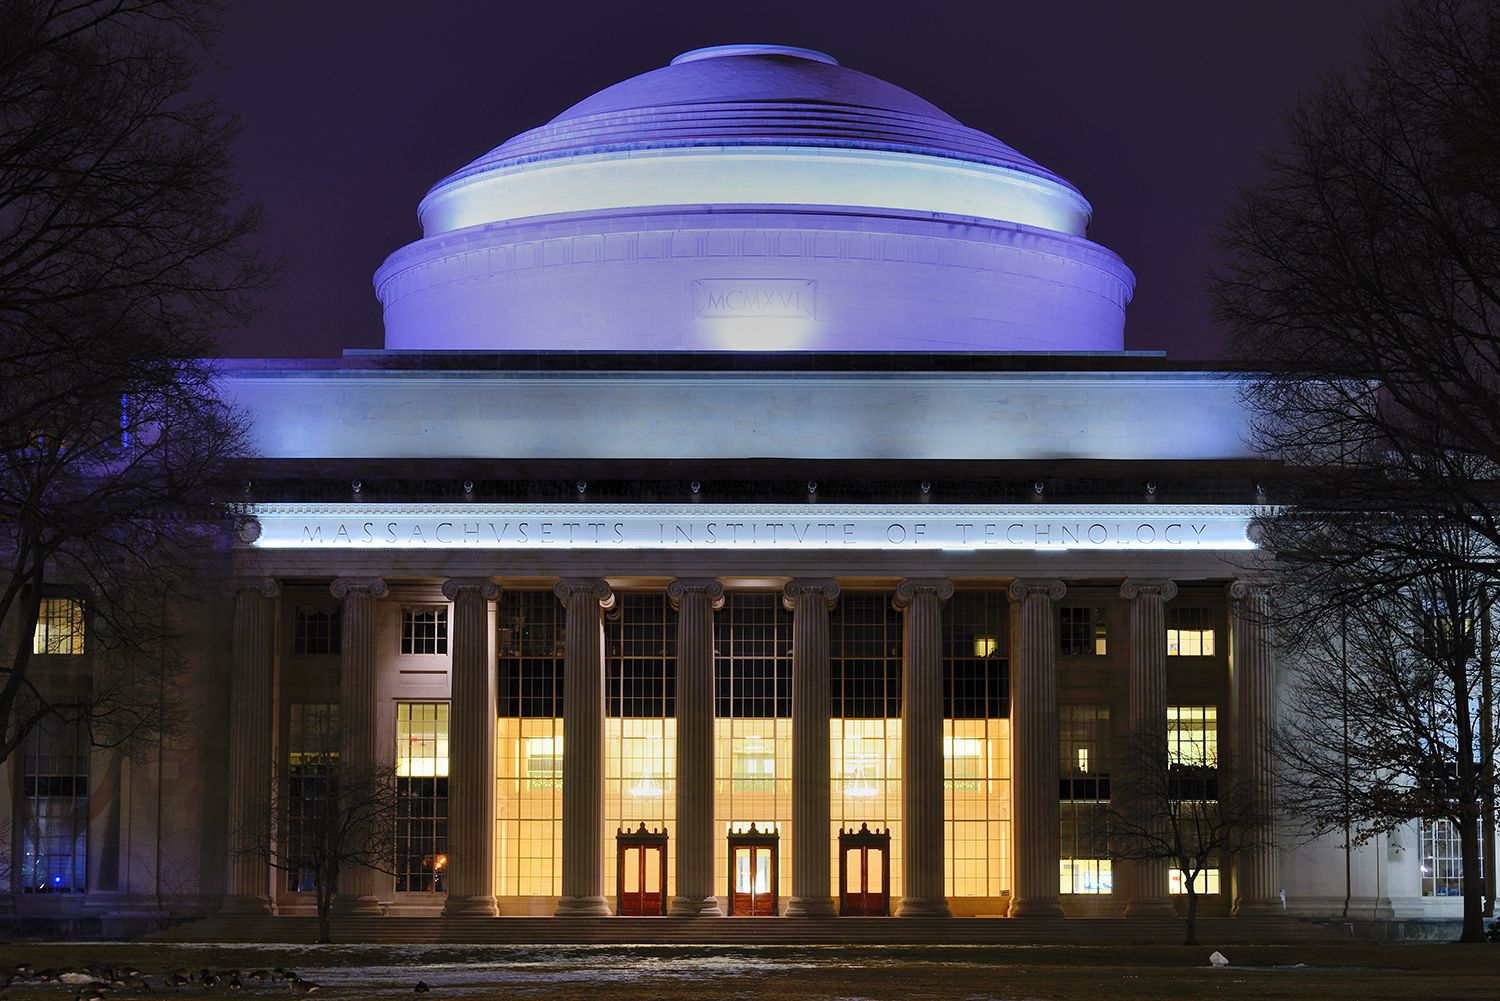 mit-admissions-sat-scores-financial-aid-and-more